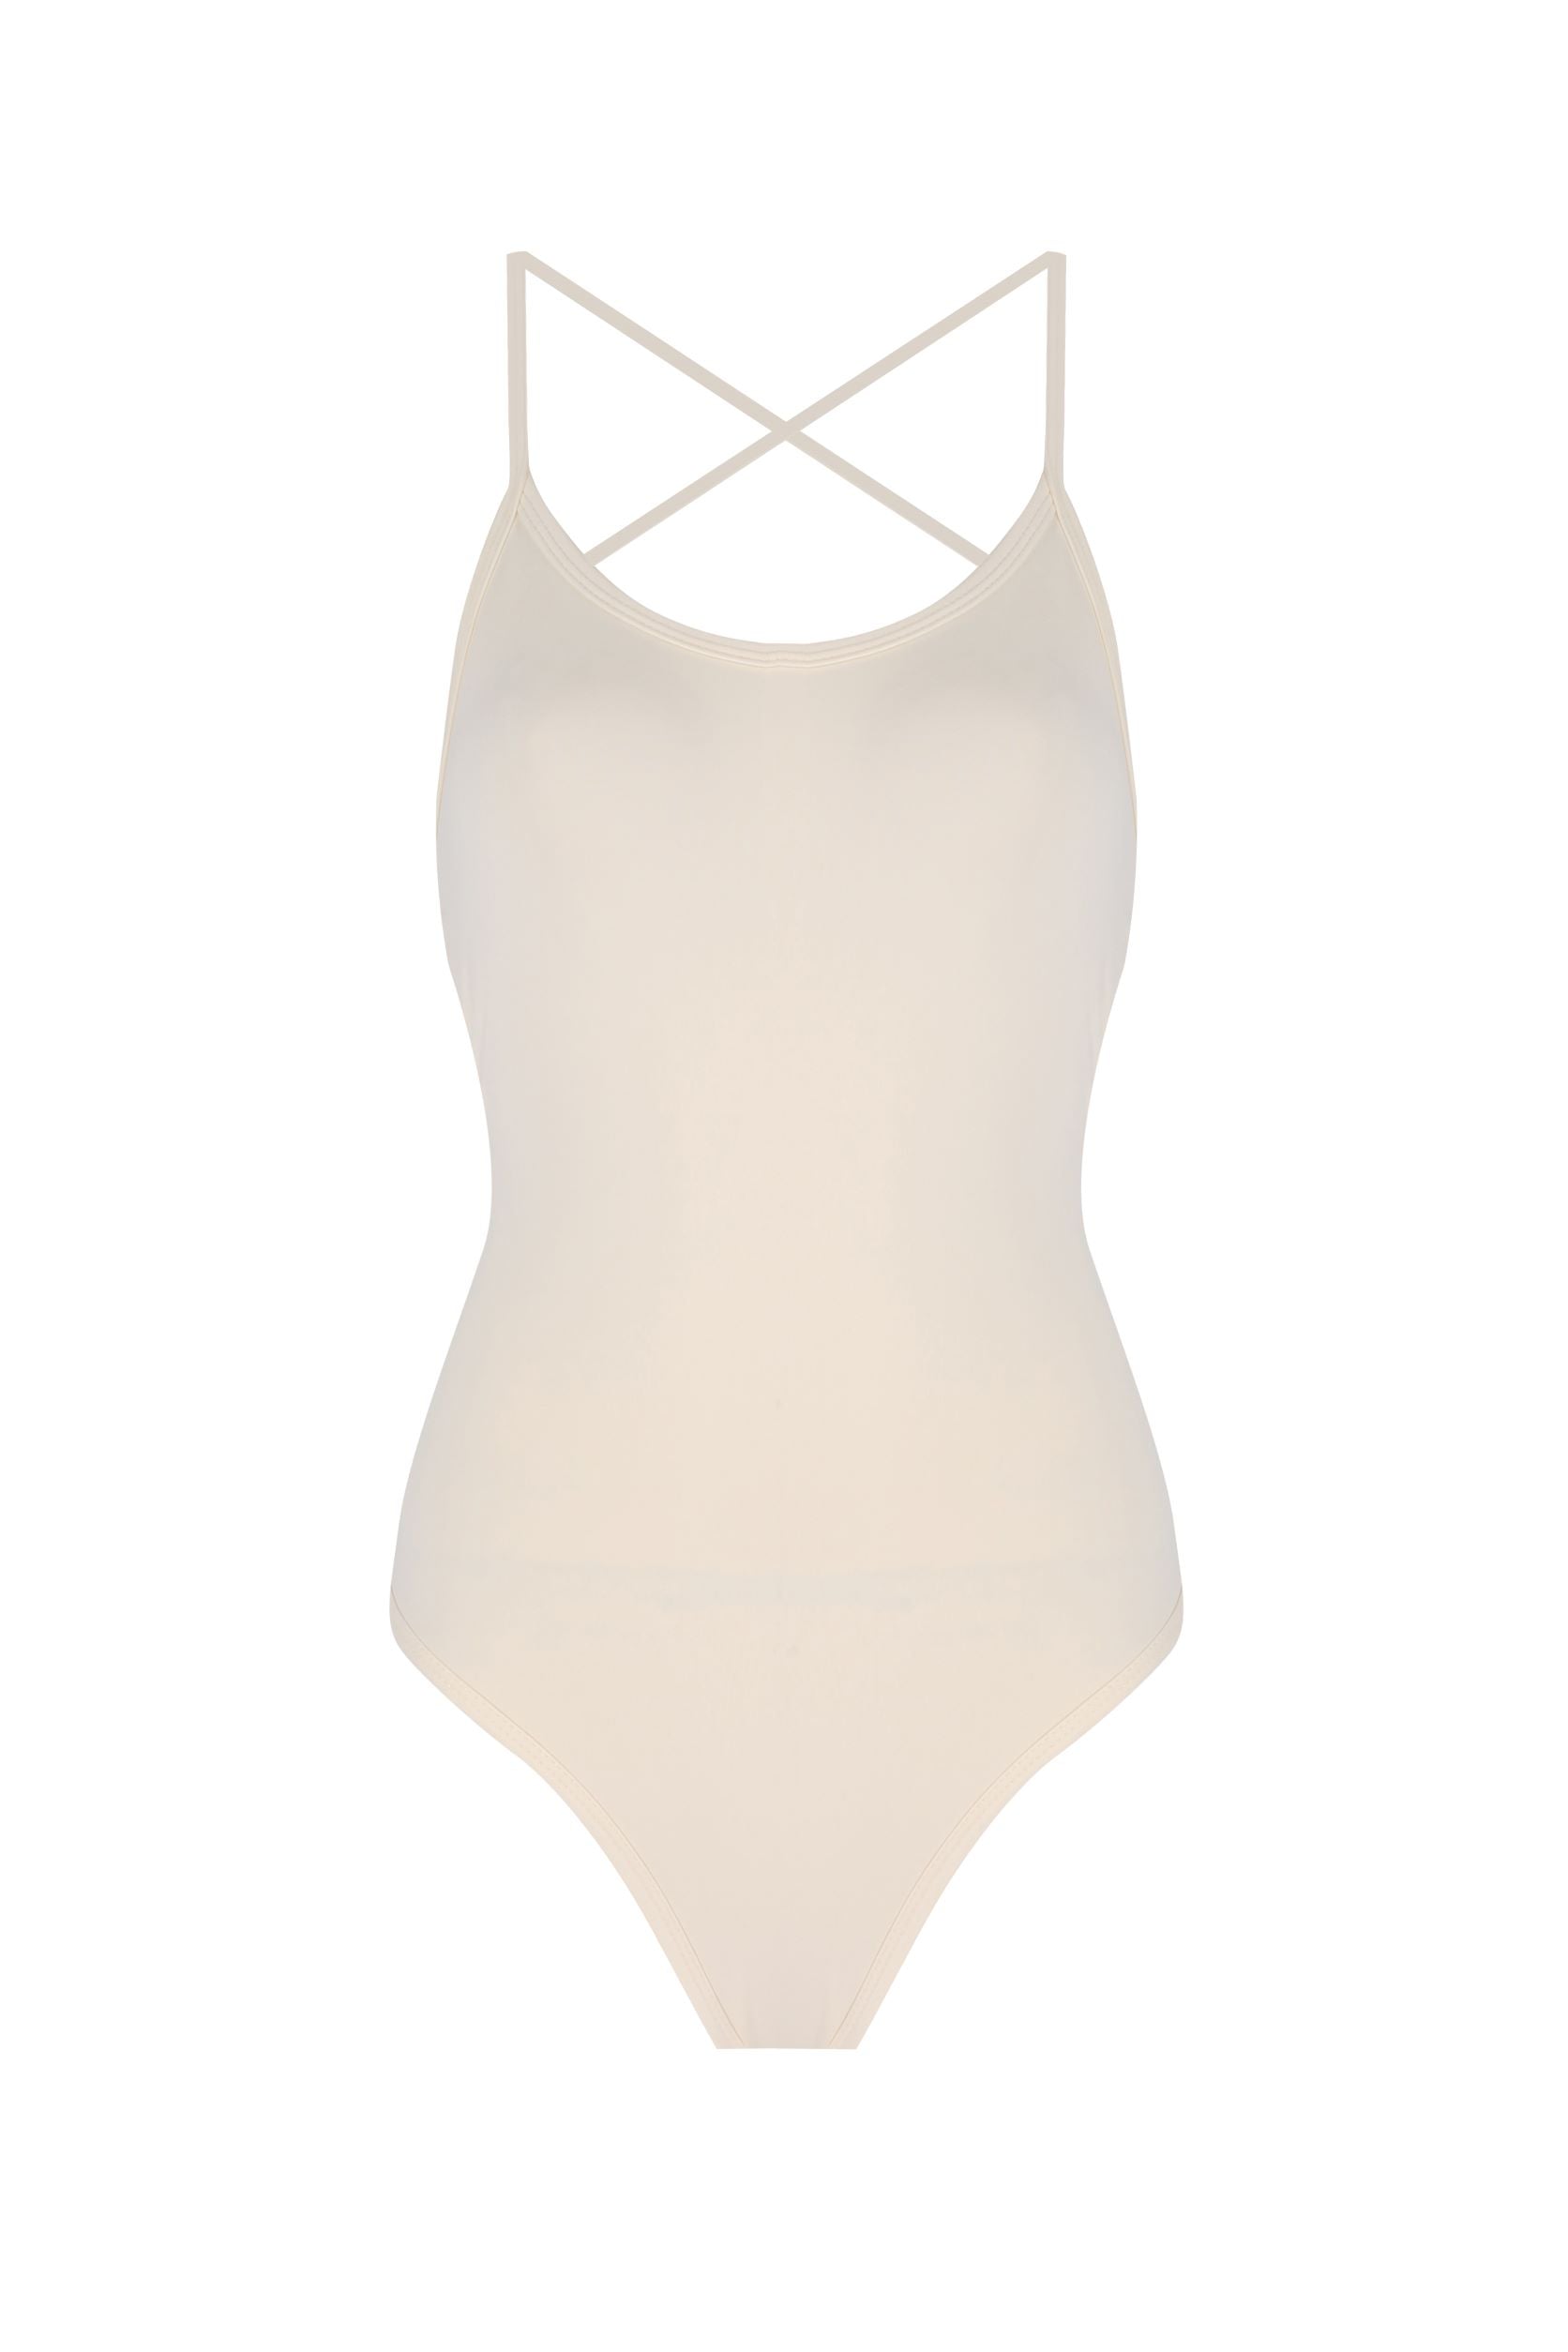 Women's Racer Swimsuit - White Extra Small Yorstruly